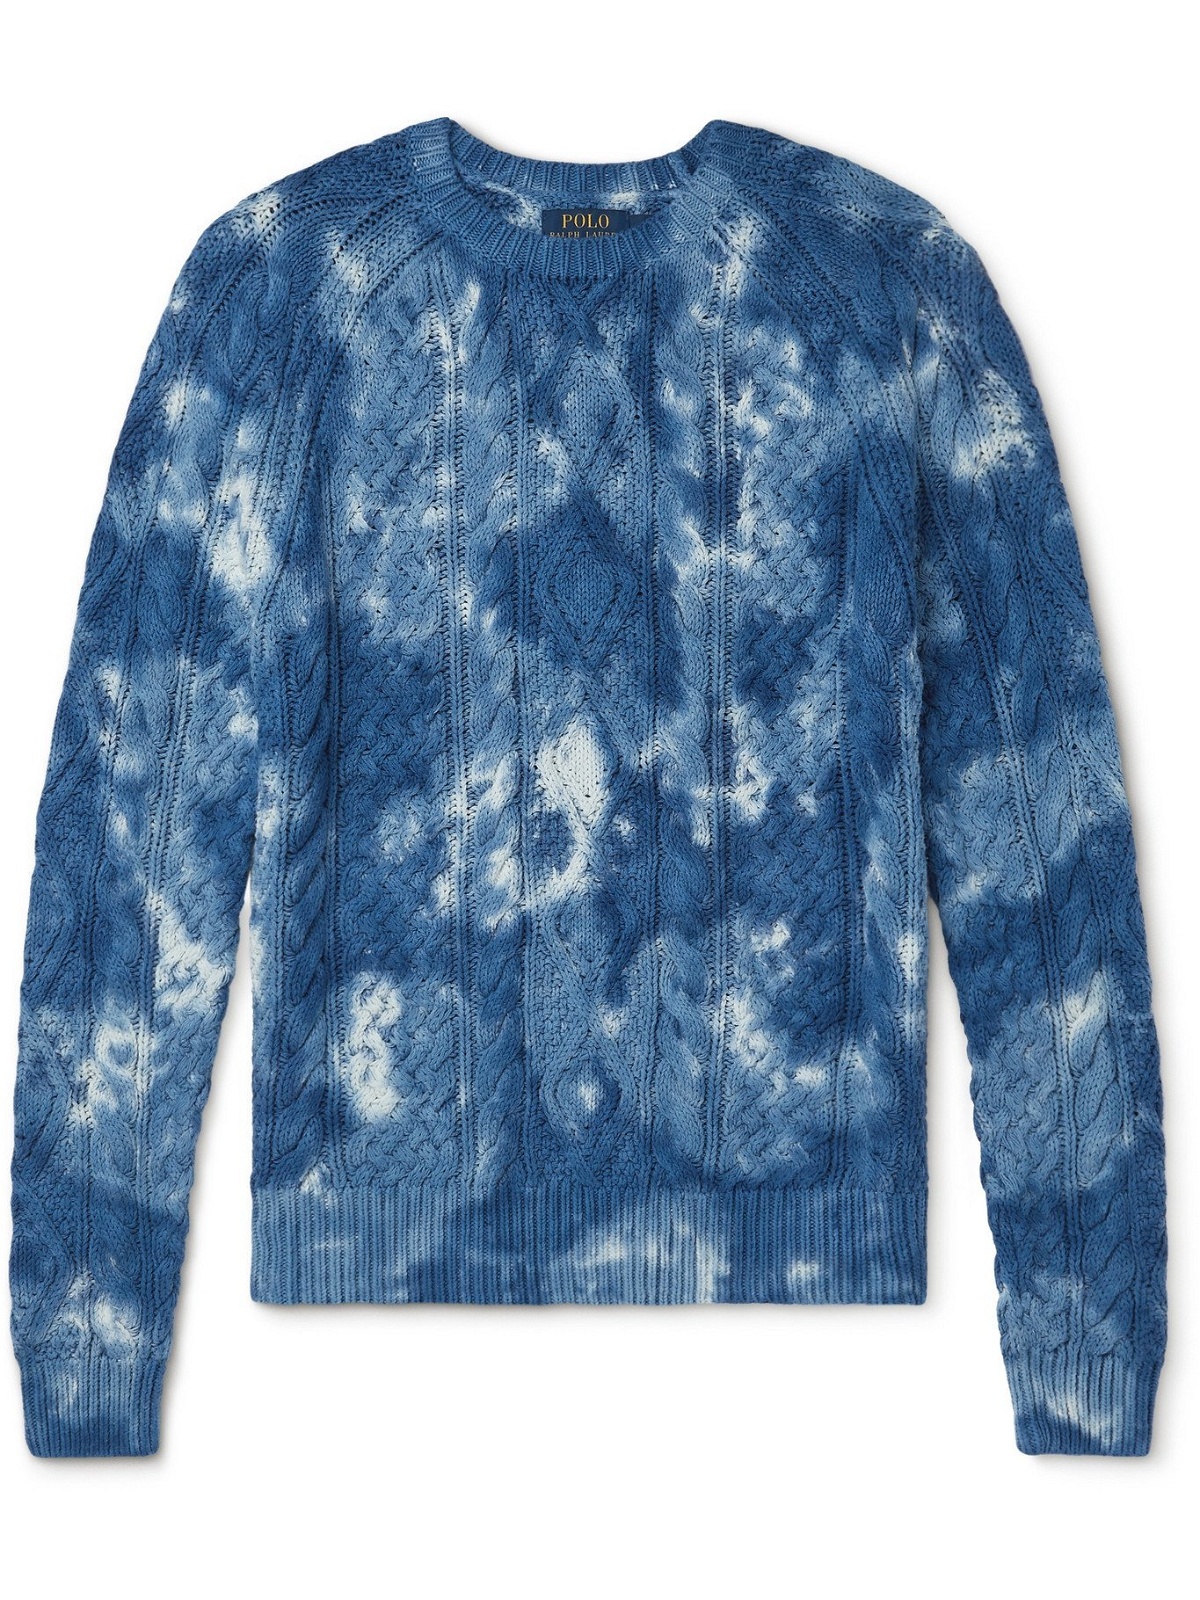 POLO RALPH LAUREN - Tie-Dyed Cable-Knit Cotton Sweater - Blue Polo